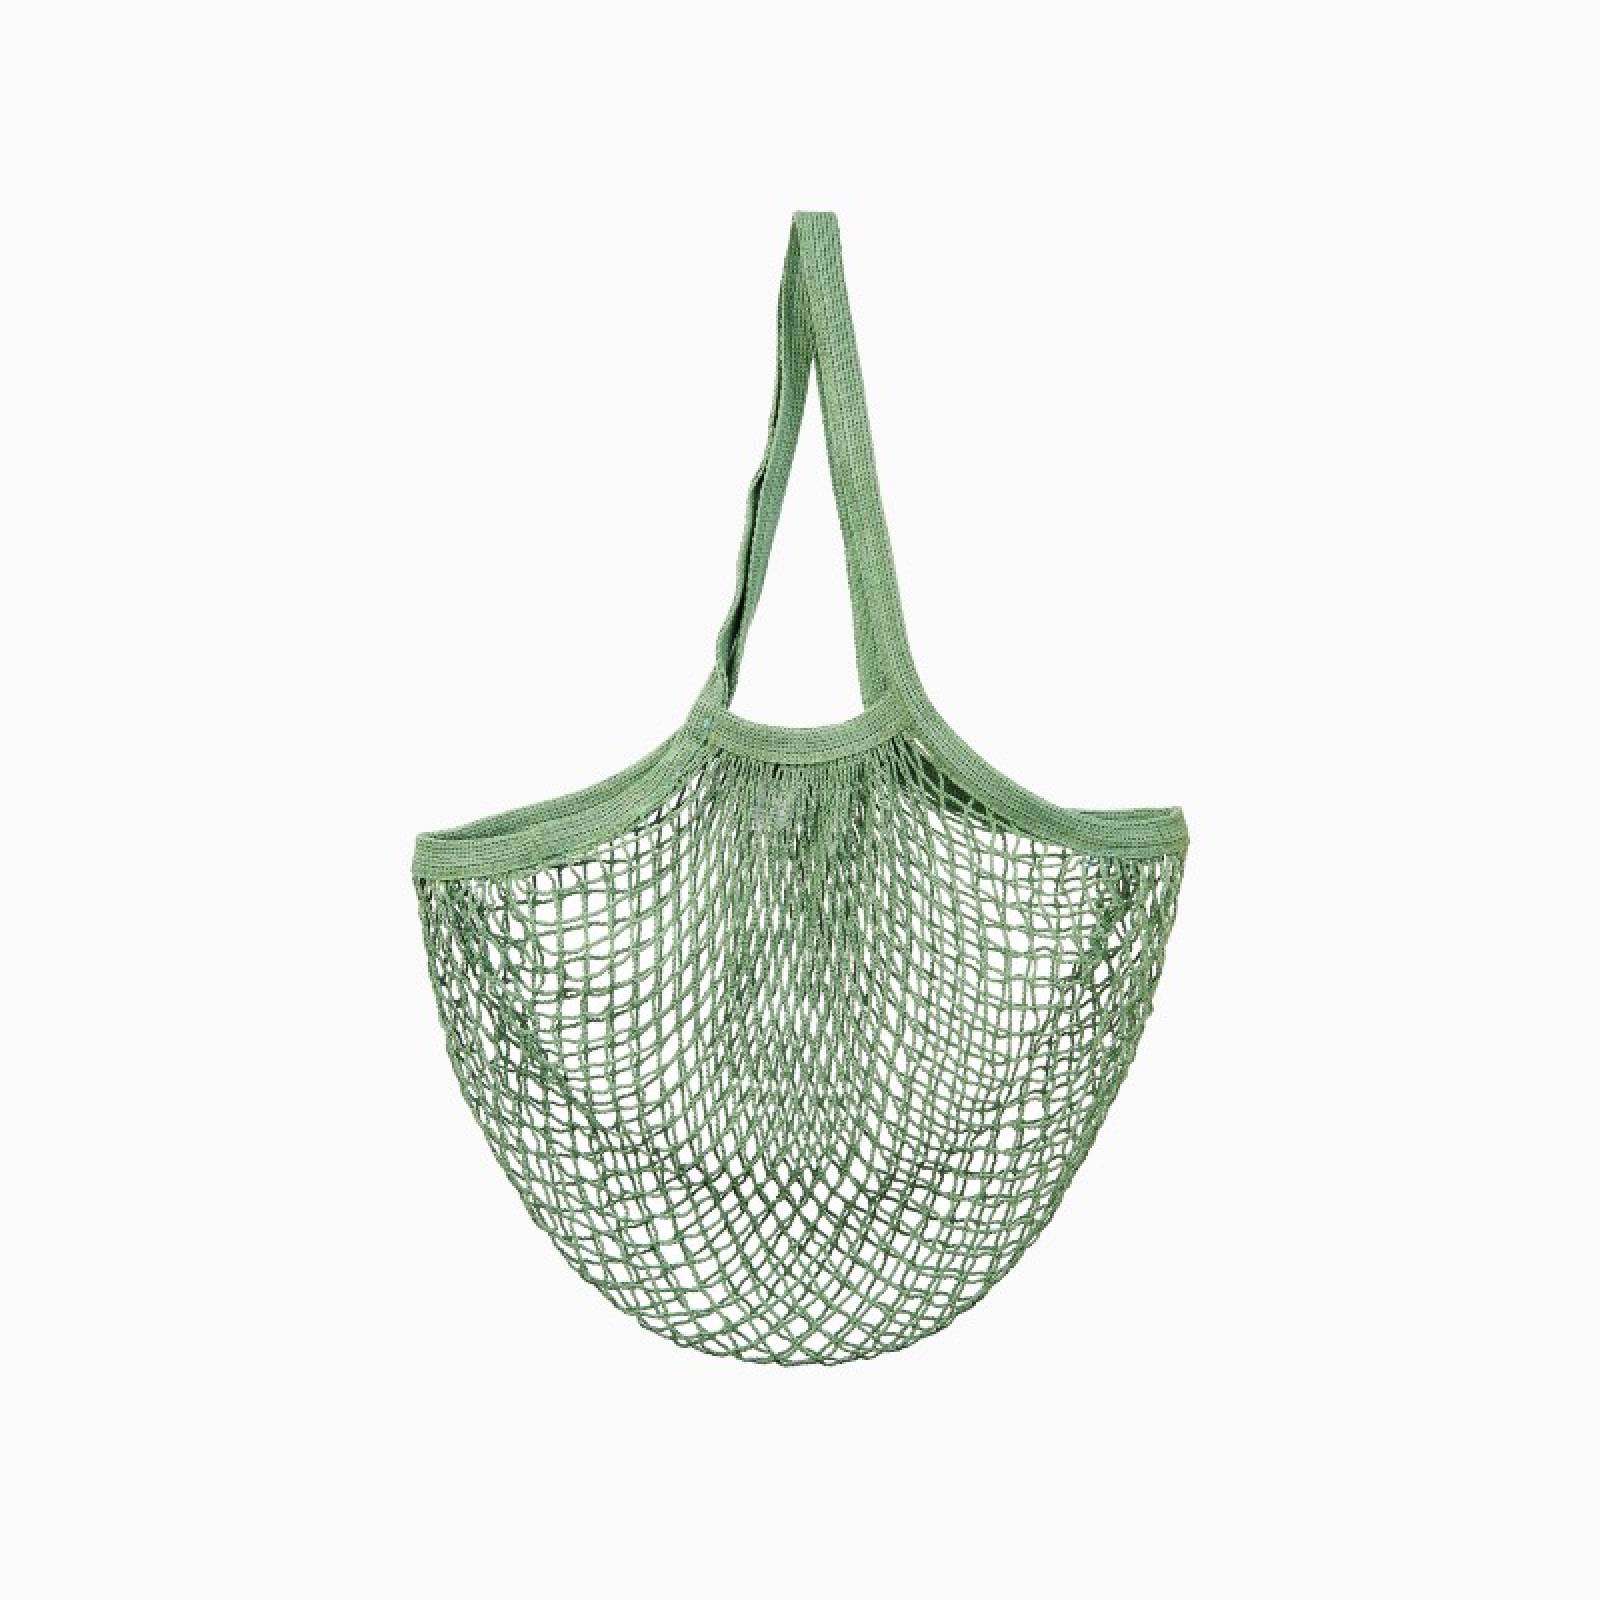 String Shopping Bag In Olive Green thumbnails